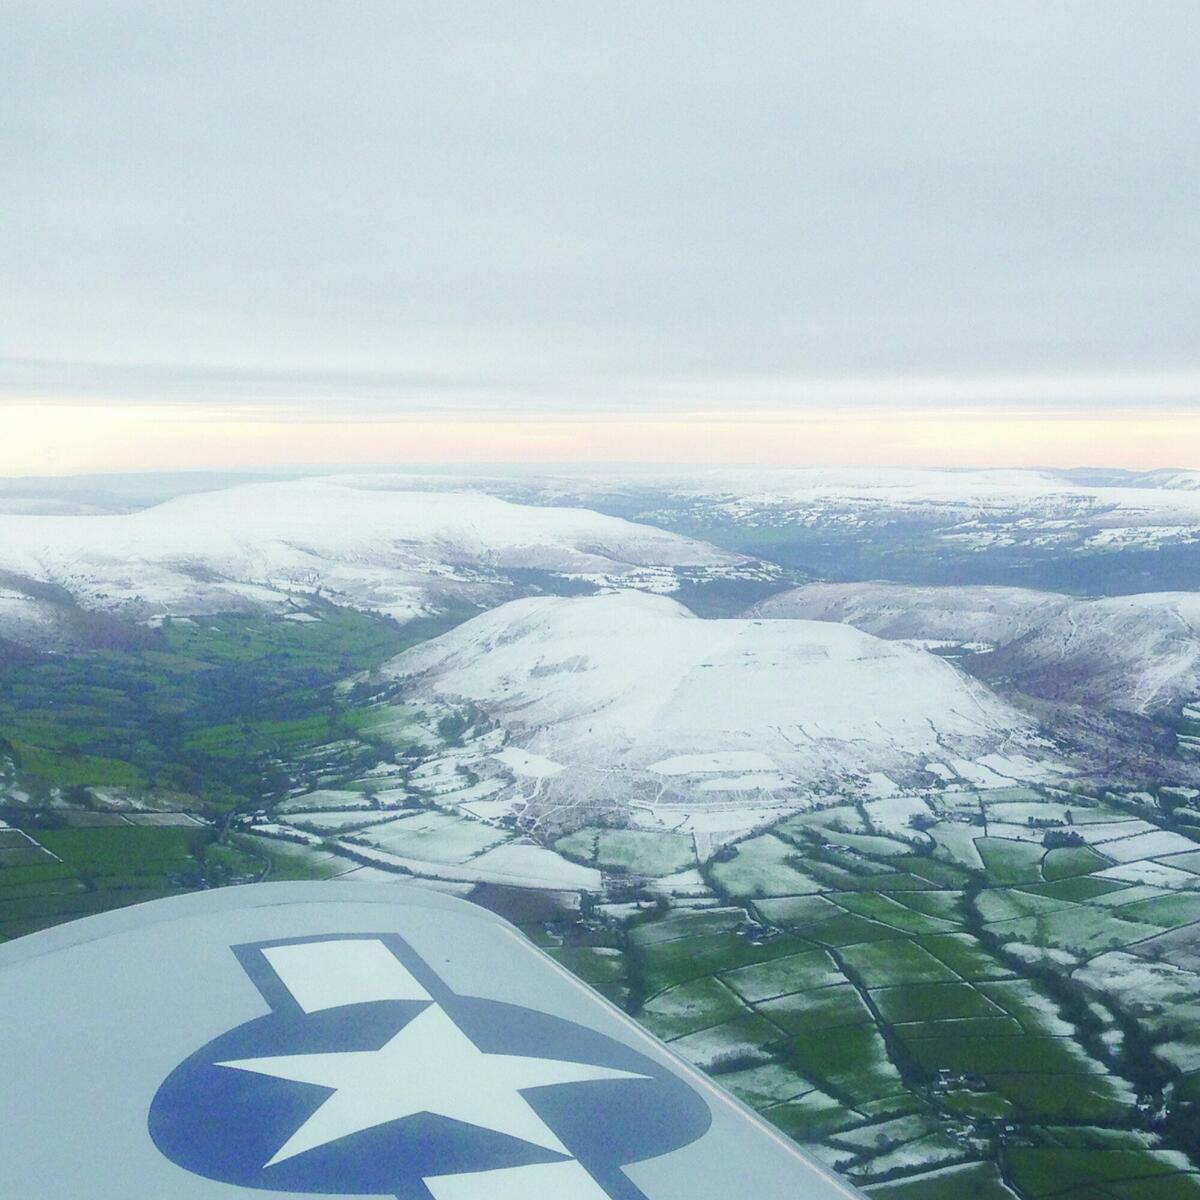 Views of the Black Mountains in winter